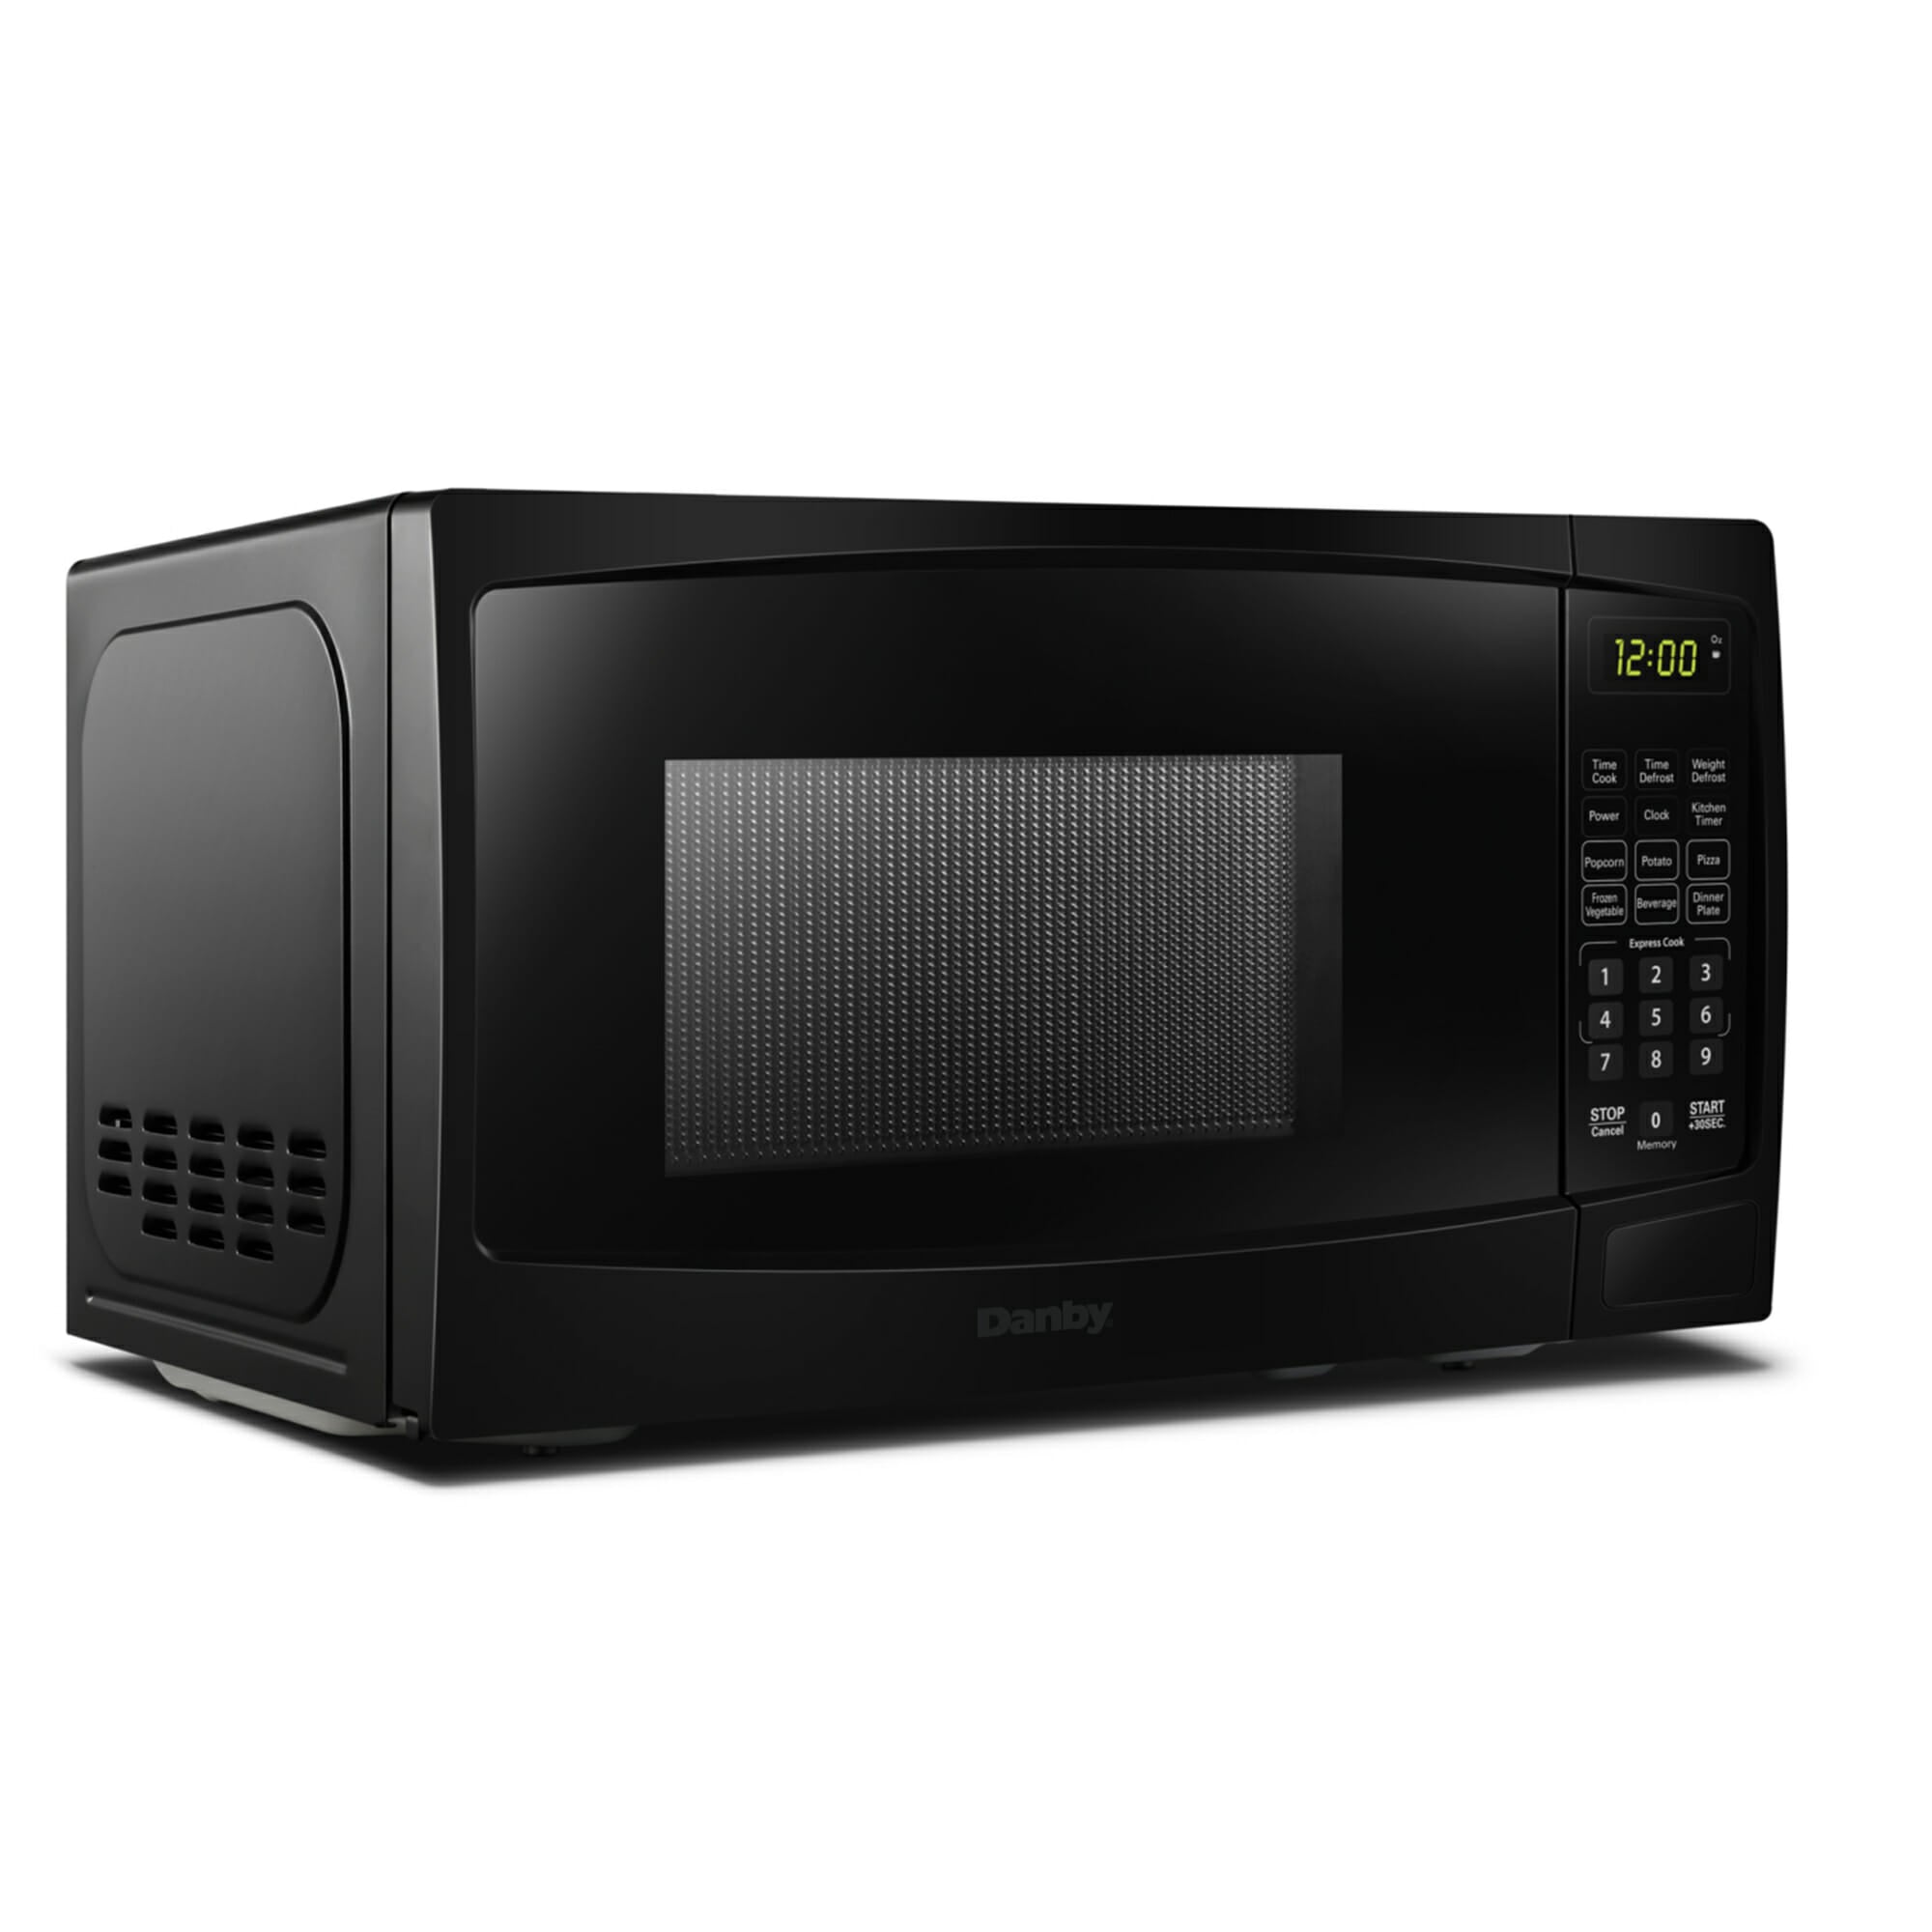 Danby - 1.1 cu. Ft  Counter top Microwave in Black Stainless - DBMW1120BBB